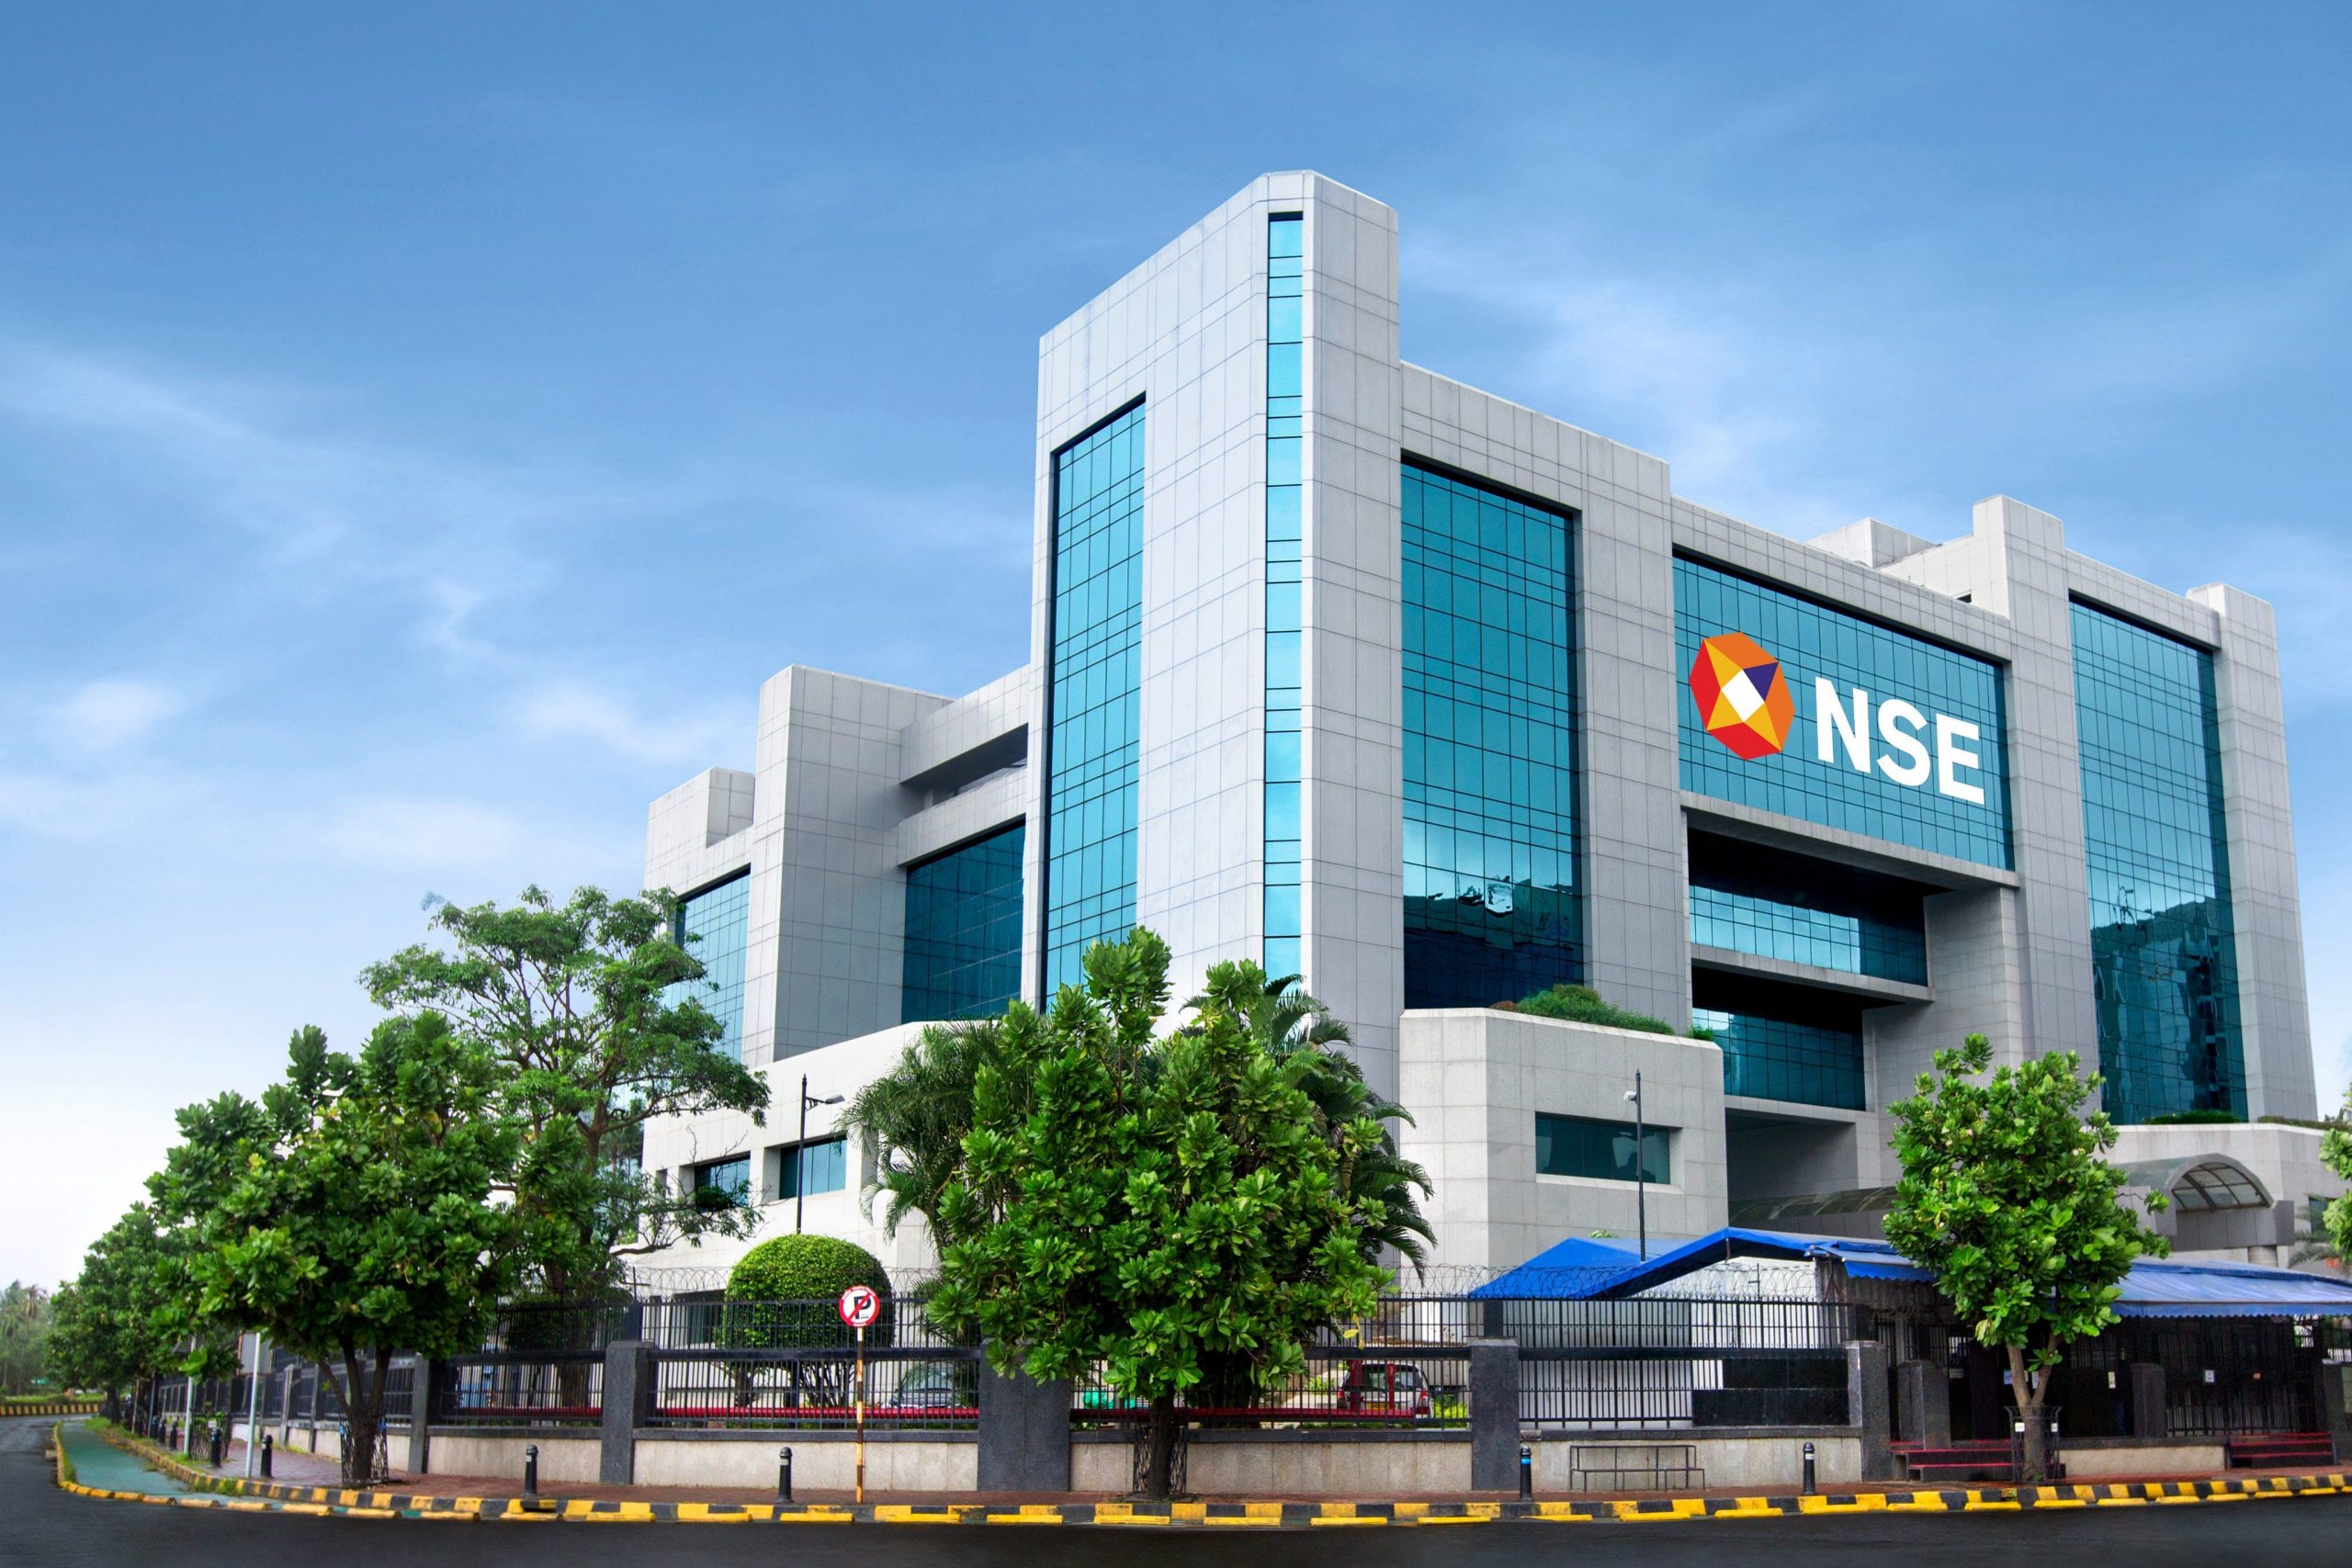 NSE F&O Ban: No stock has been put under ban on Tuesday, July 12, 2022